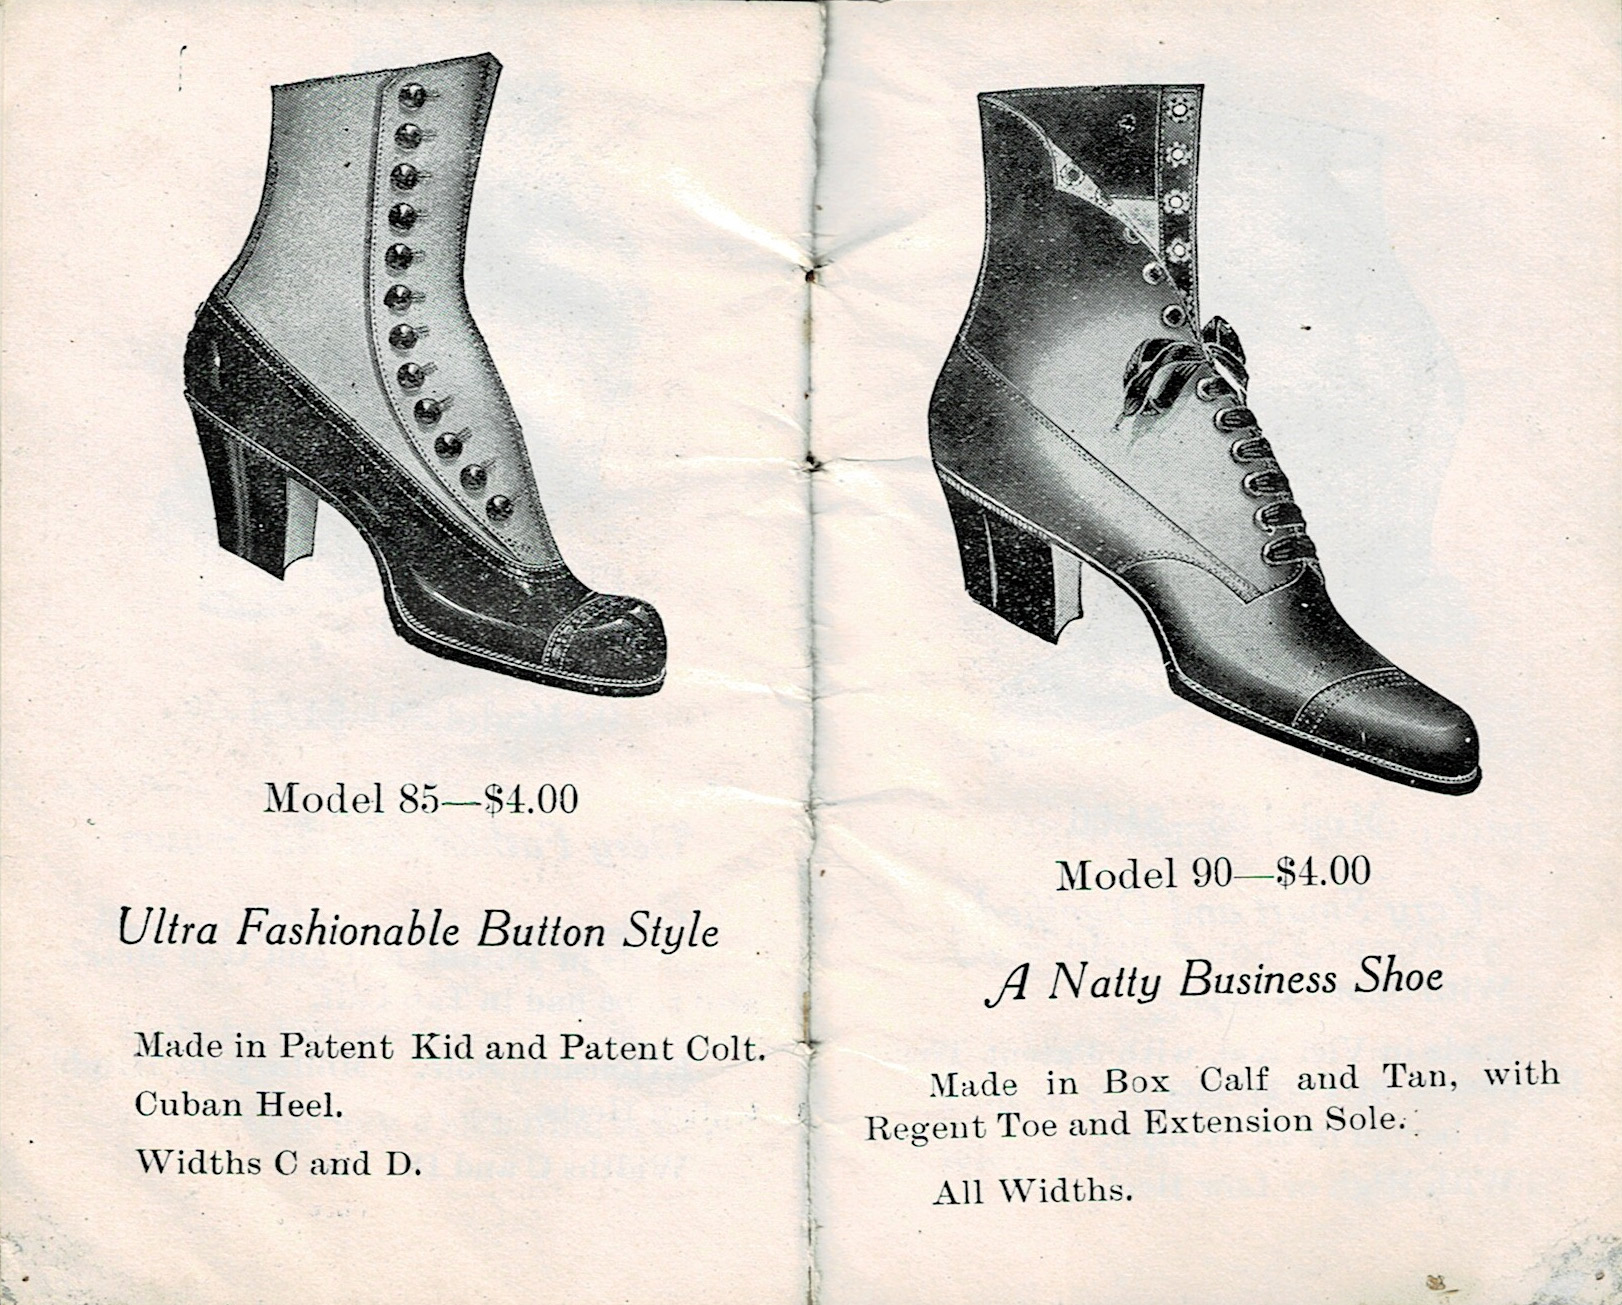 Model 85—$4.00

Ultra fashionable button style

Made in patent kid and patent colt.

Cuban heel.

Widths C and D.

Model 90—$4.00

A natty business shoe

Made in box calf and tan, with regent toe and extension sole.

All widths.